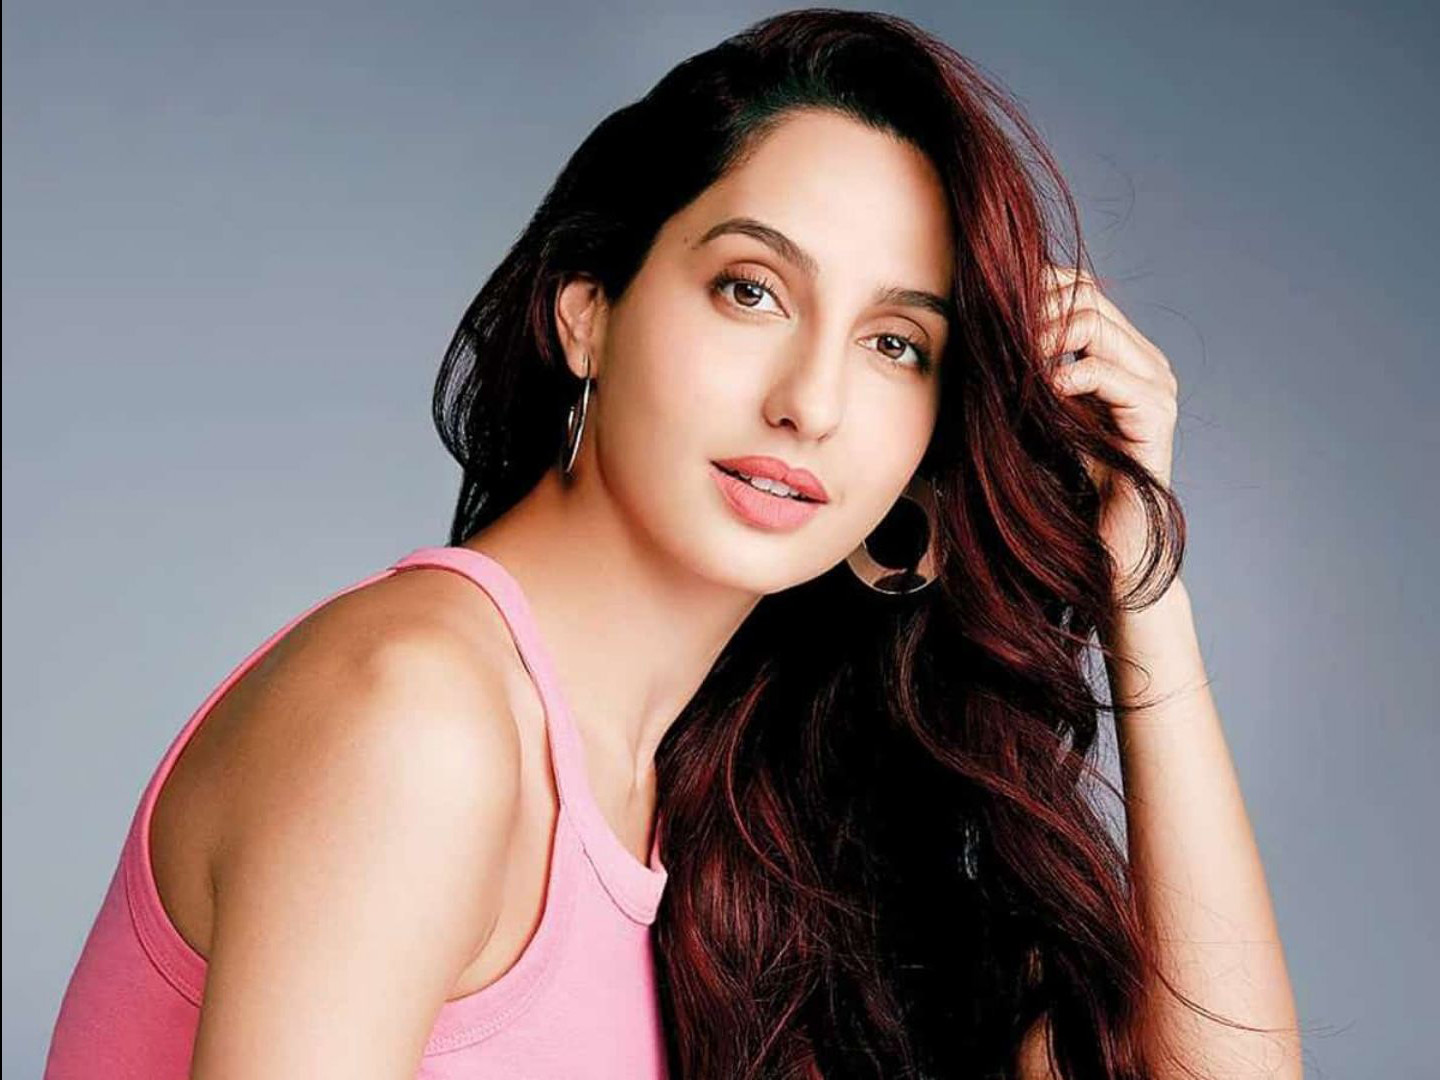 Nora Fatehi Expresses Anger Over Intrusive Paparazzi, Calls Out Camera Zooming In On Private Parts